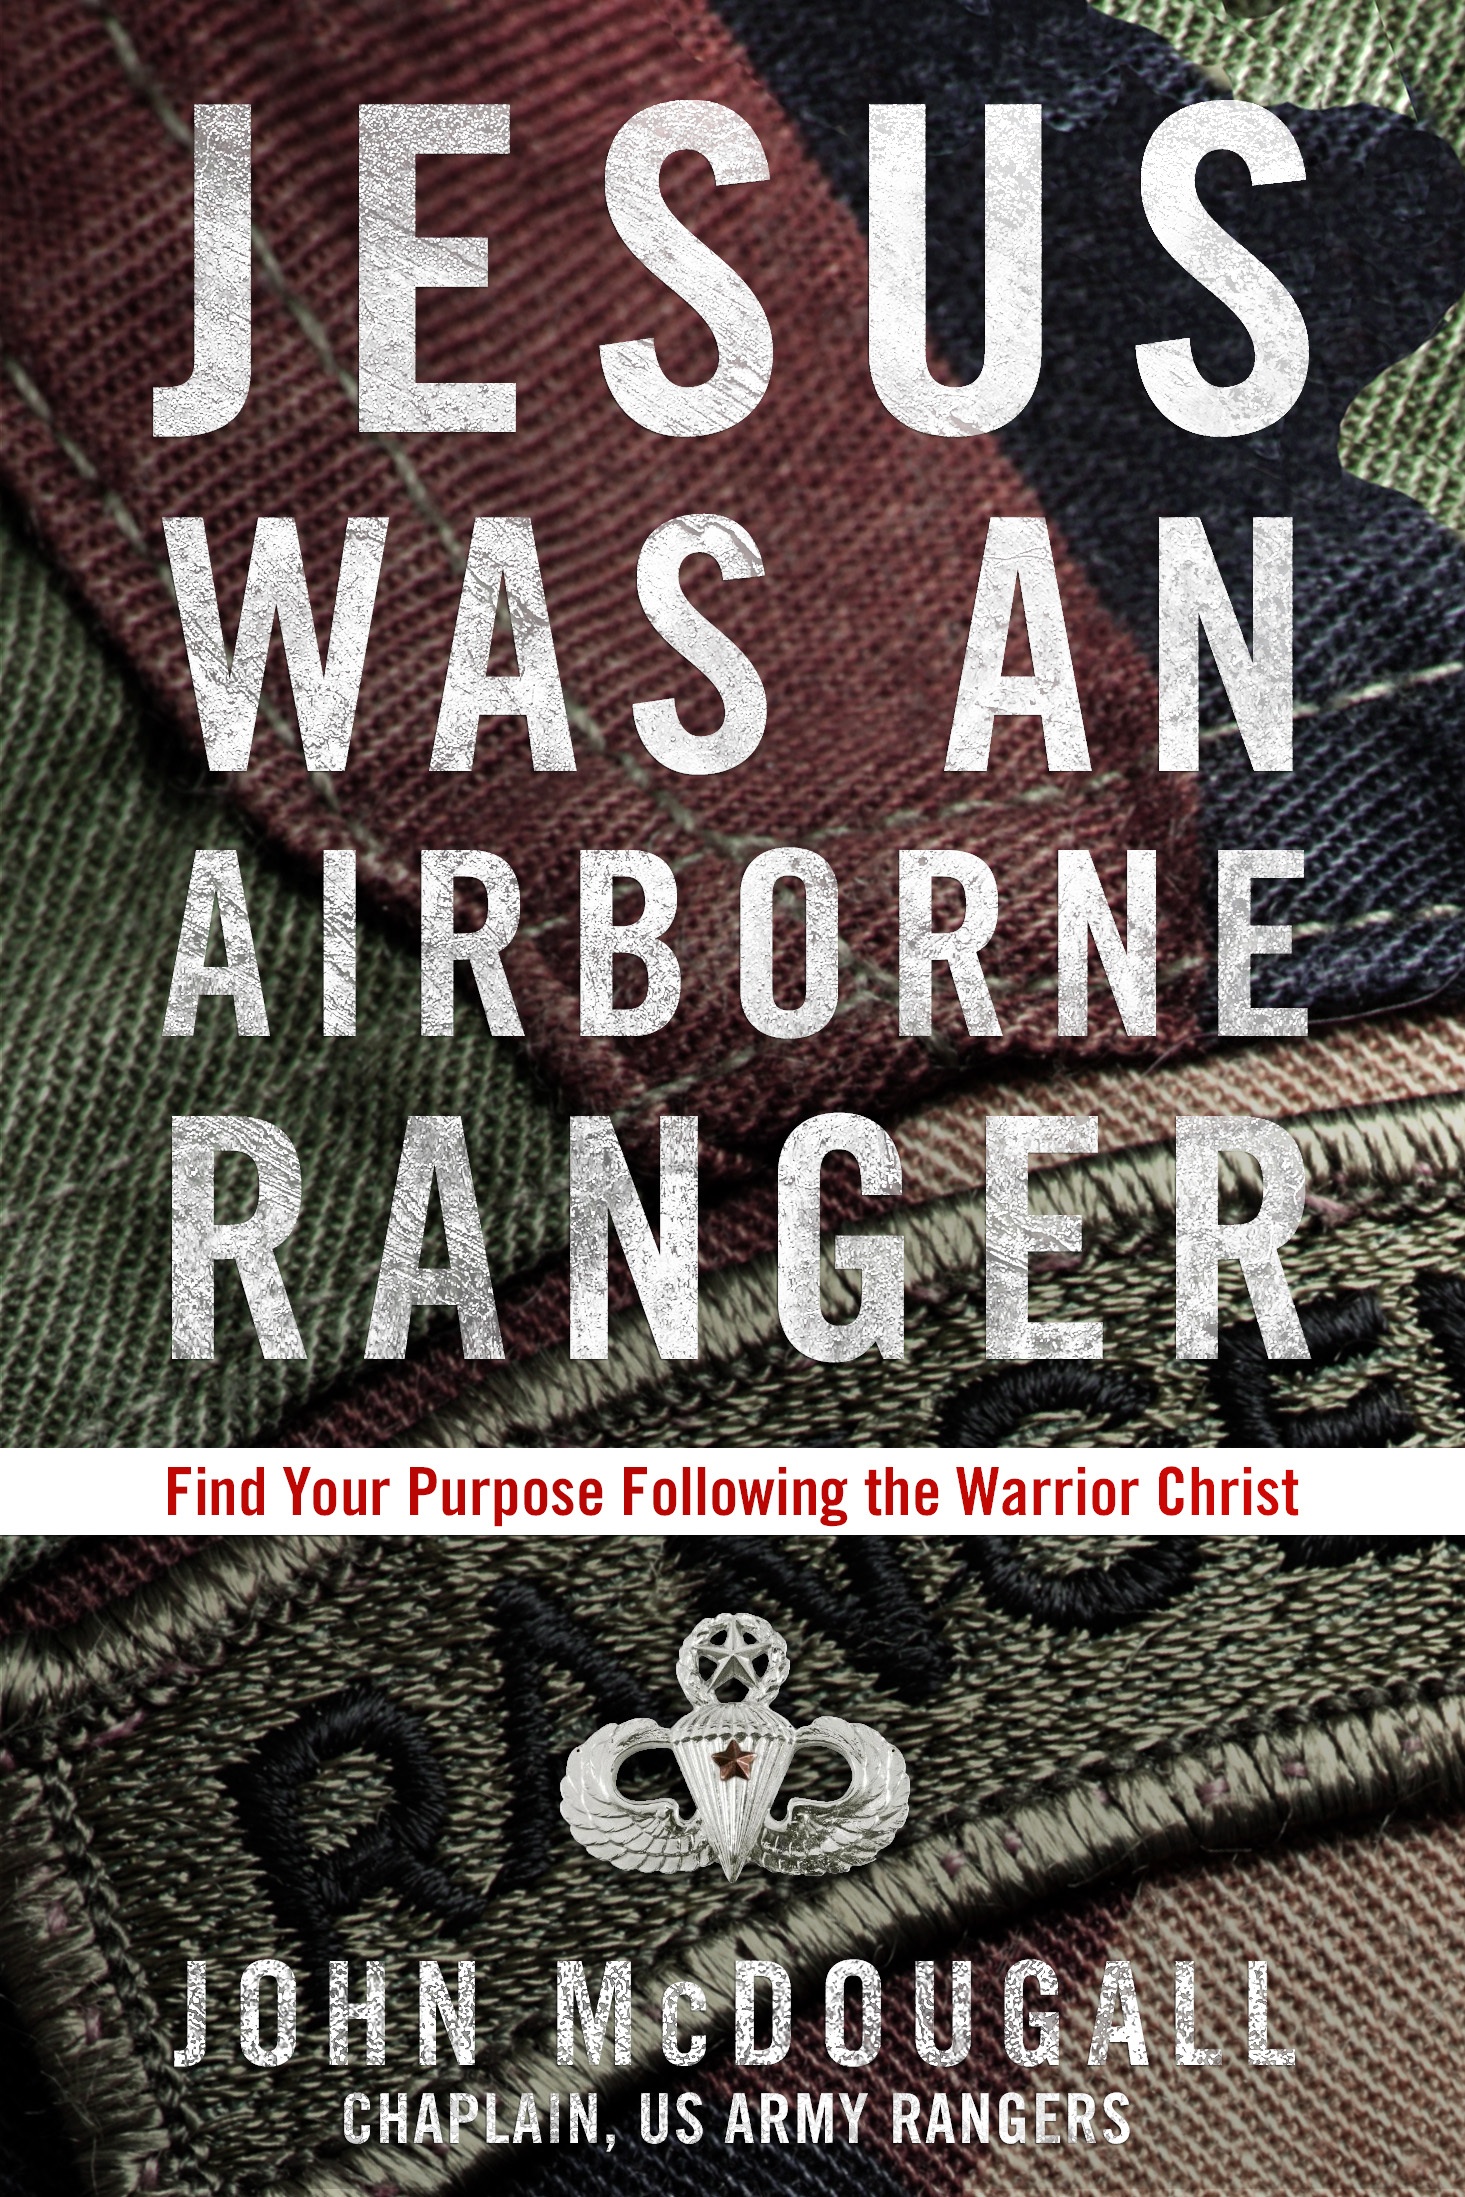 An Army Chaplain broke military rules by promoting his book while wearing his uniform. Image via Penguin Random House.